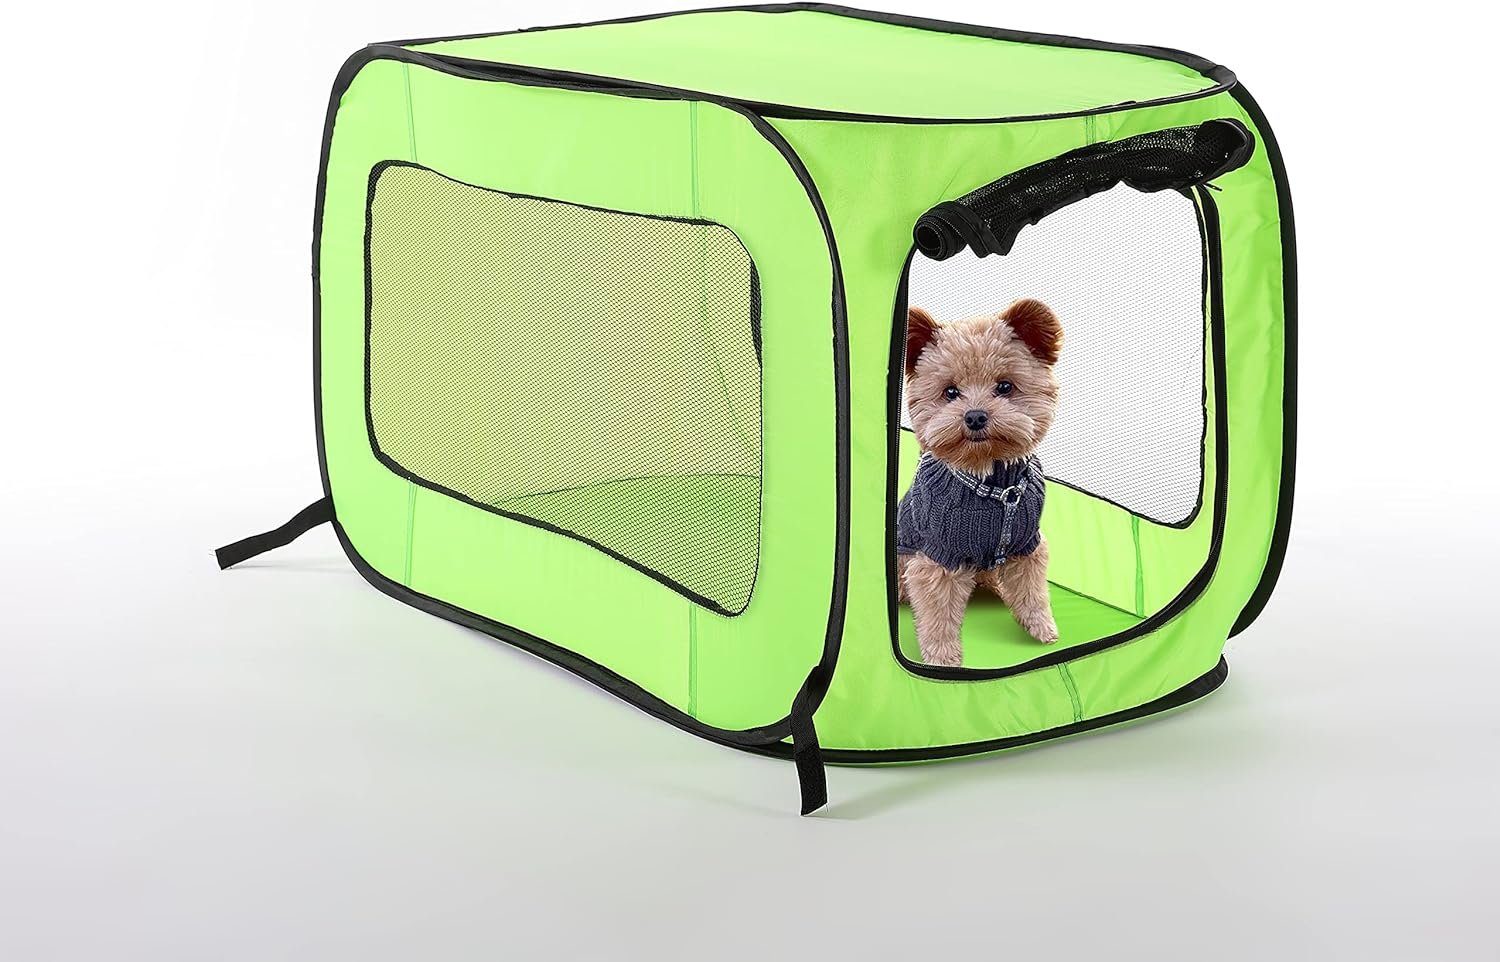 Beatrice Home Fashions Portable Pet Kennel Review